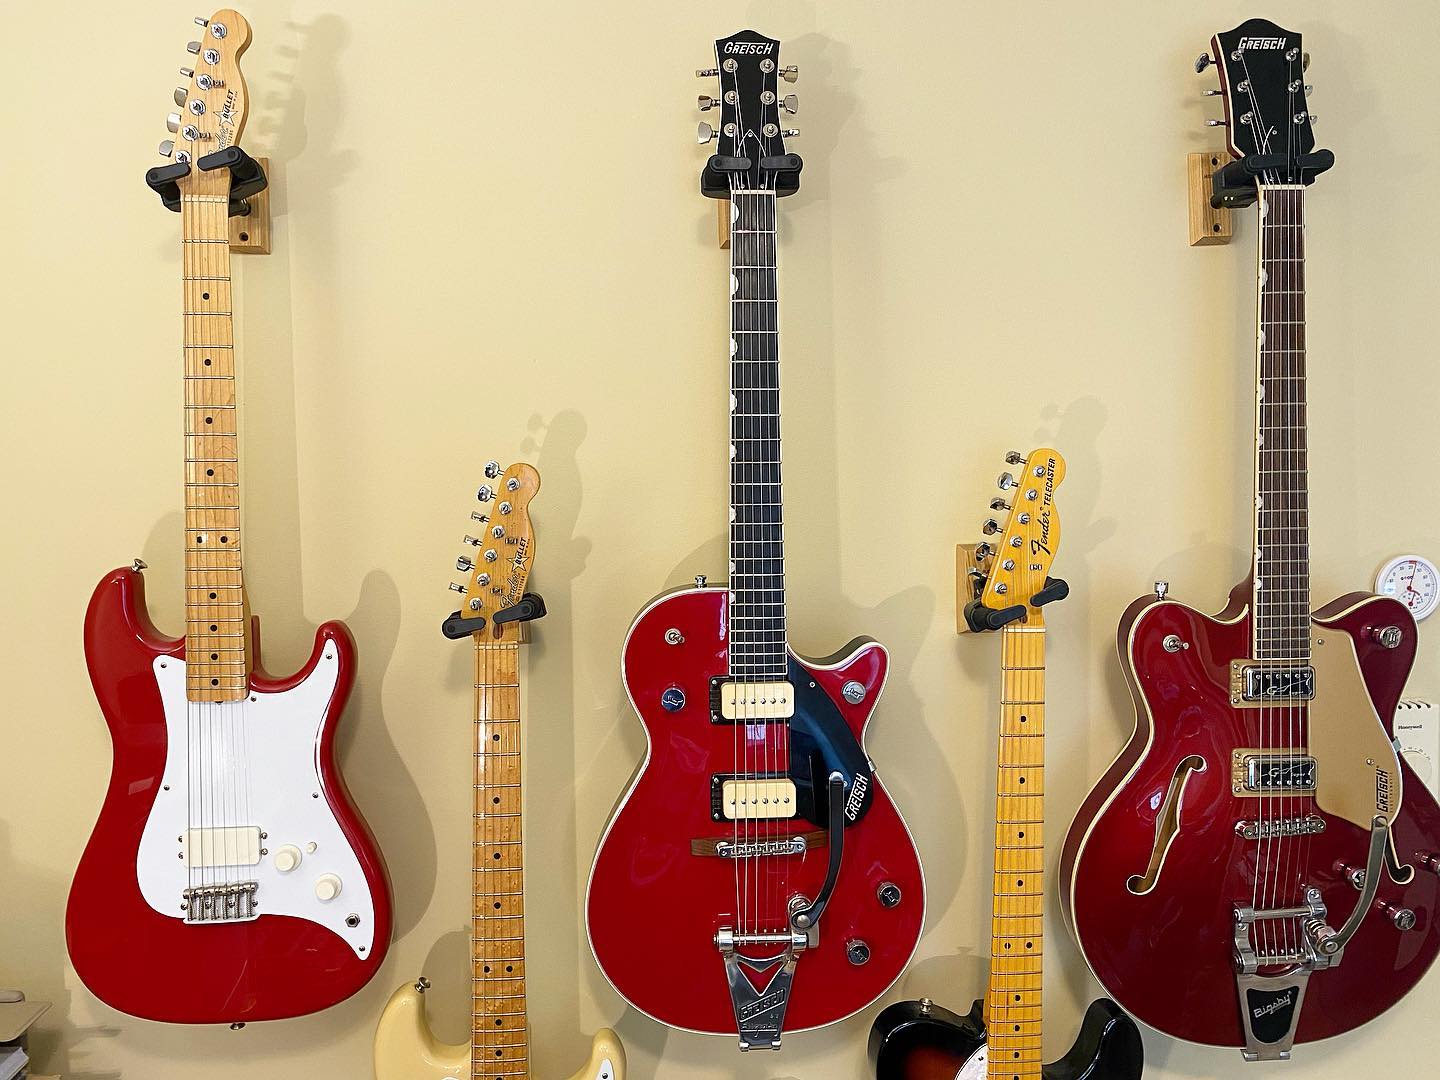 I seem to have developed a thing for red guitars.

#fenderguitars #gretschguitars 
#bluesguitar 
#bigsby